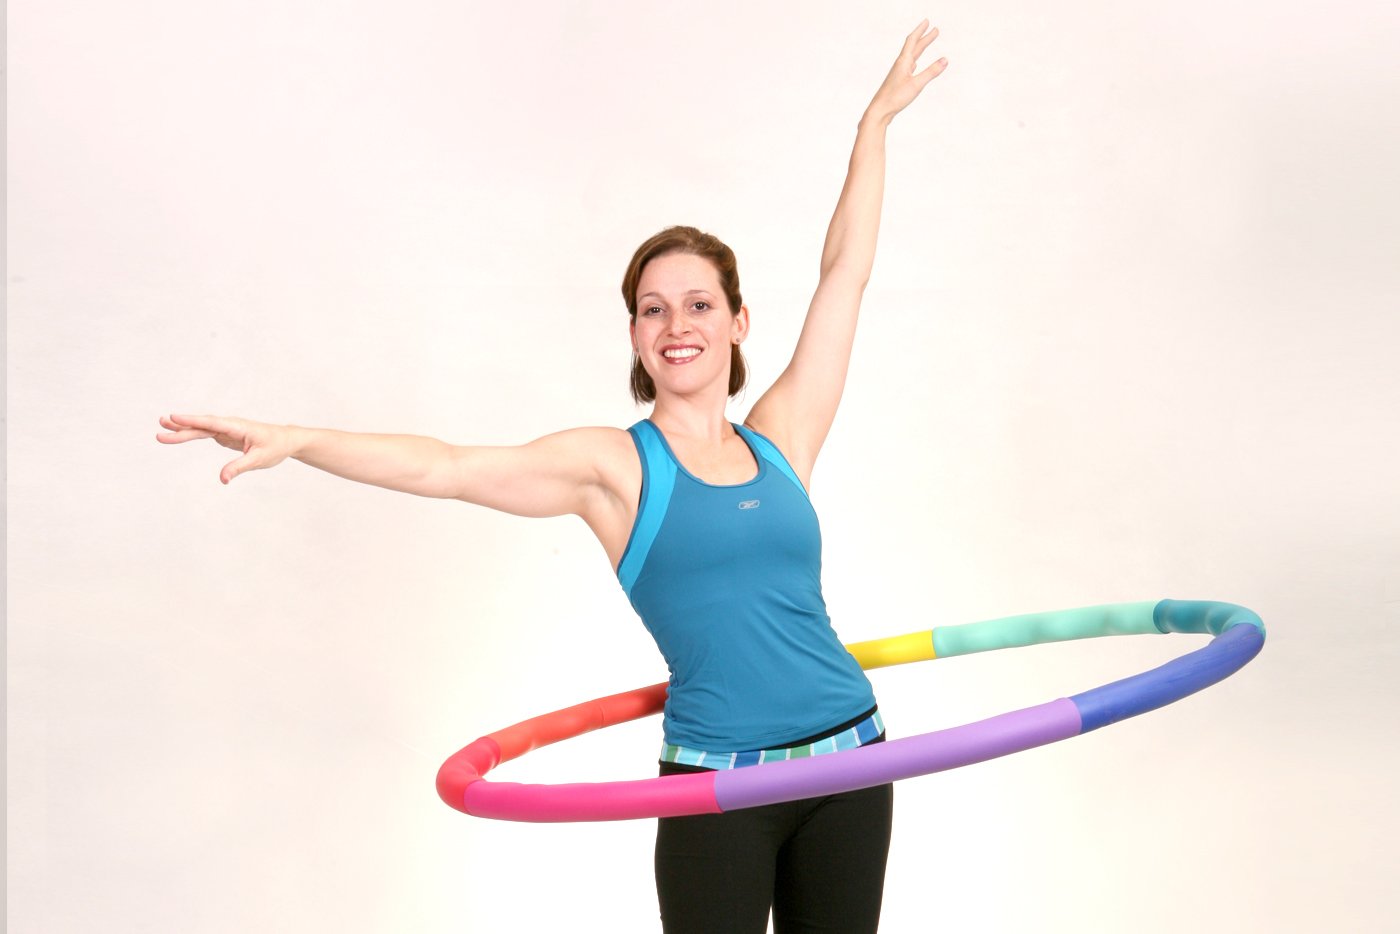 Sports Hoop Weighted Hula Hoop, ACU Hoop 4M - 4 lb Medium, Weight Loss Fitness Workout with ridges. (Rainbow Colors)